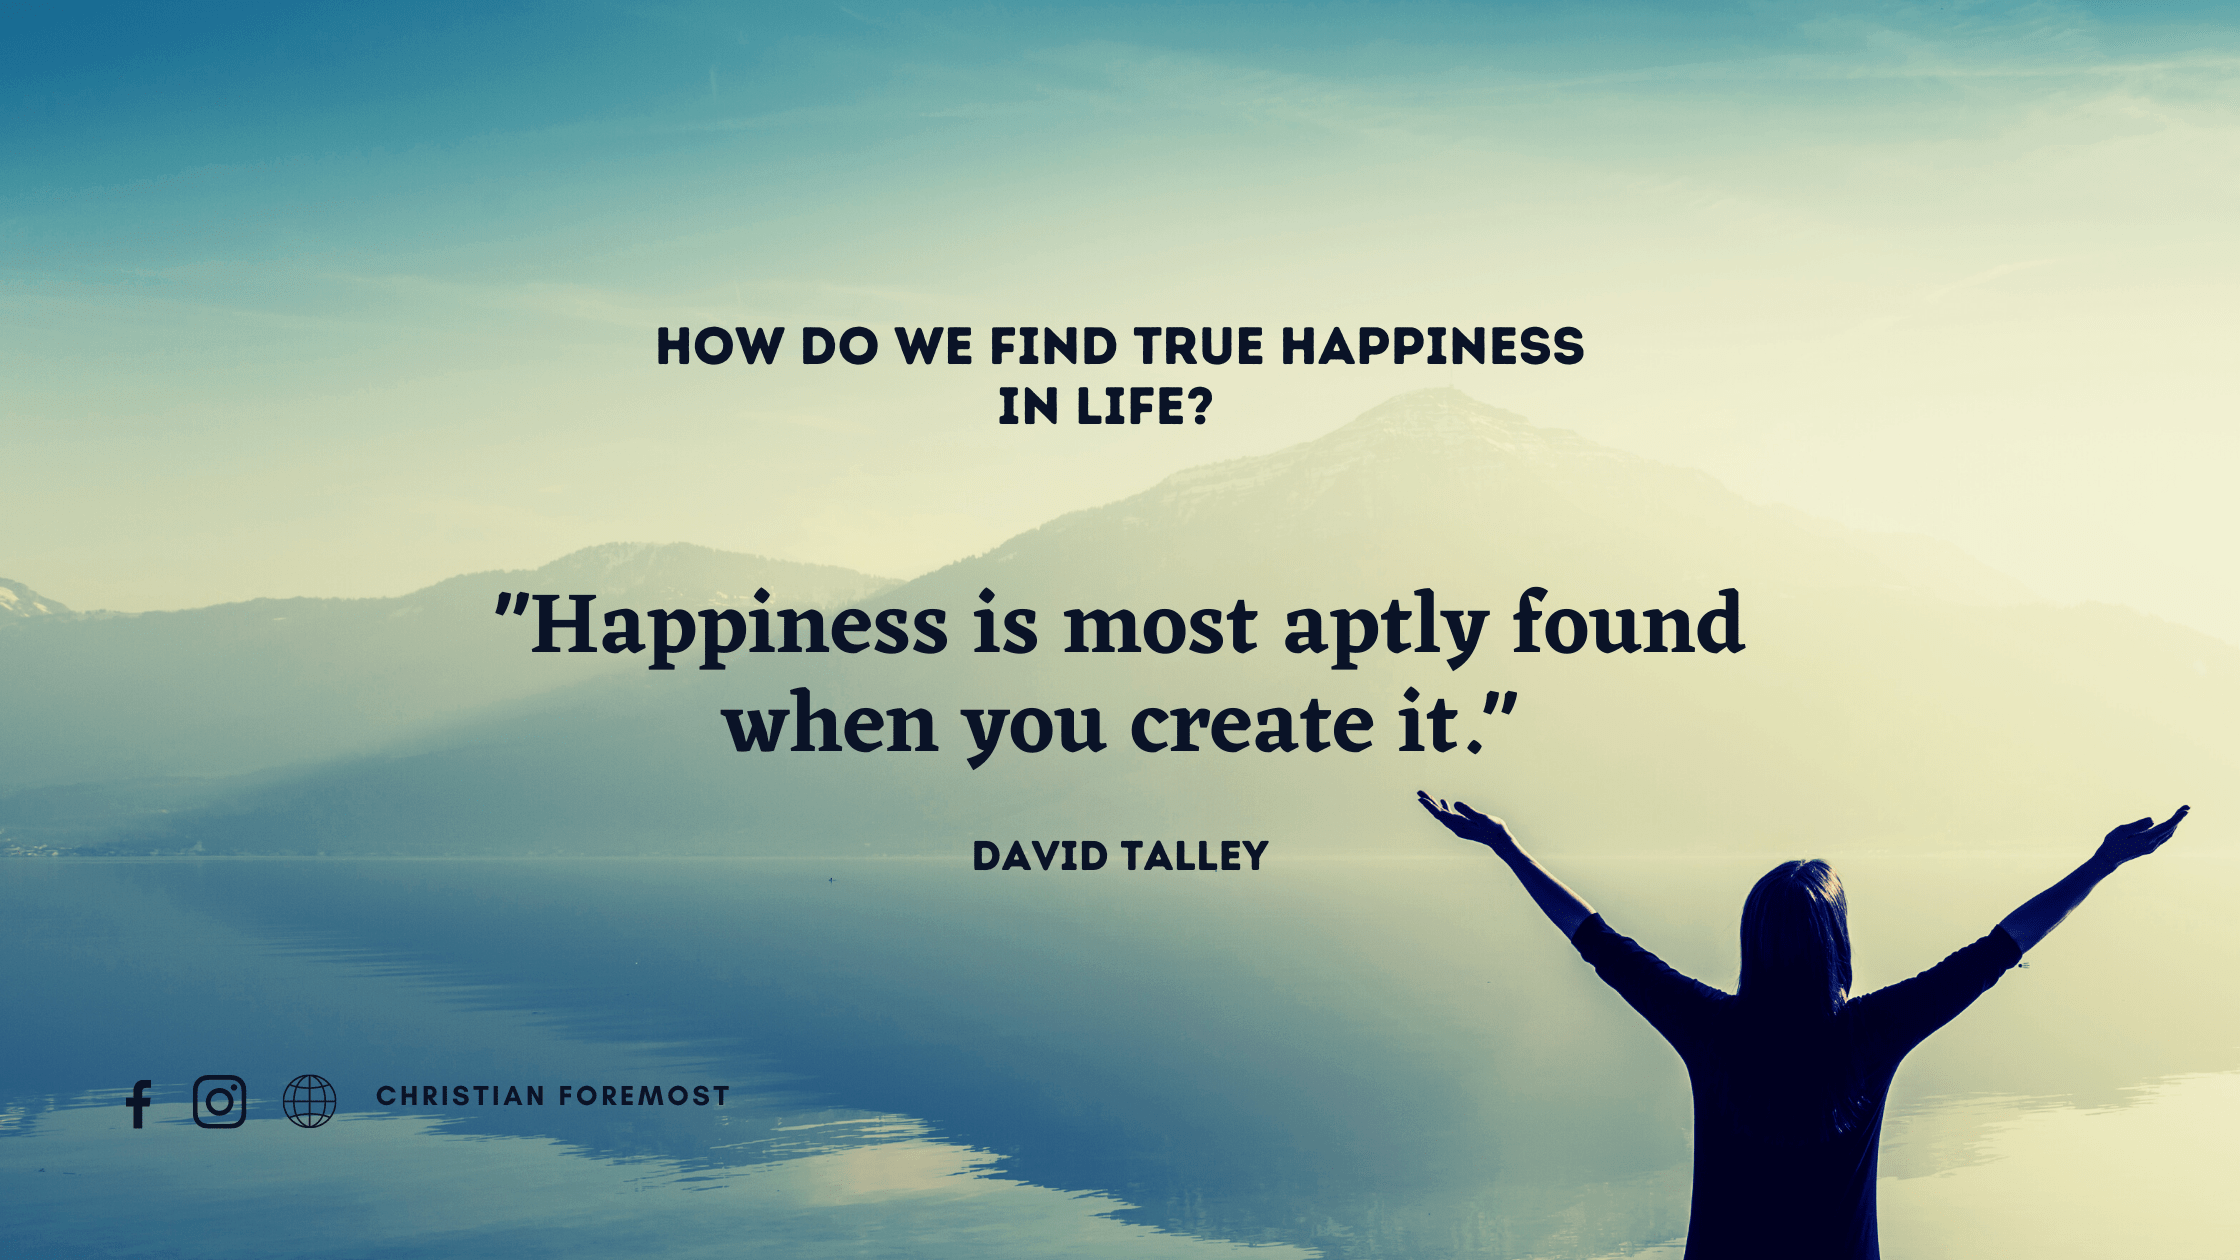 6 Answers to How We Find True Happiness in Life Christian Foremost